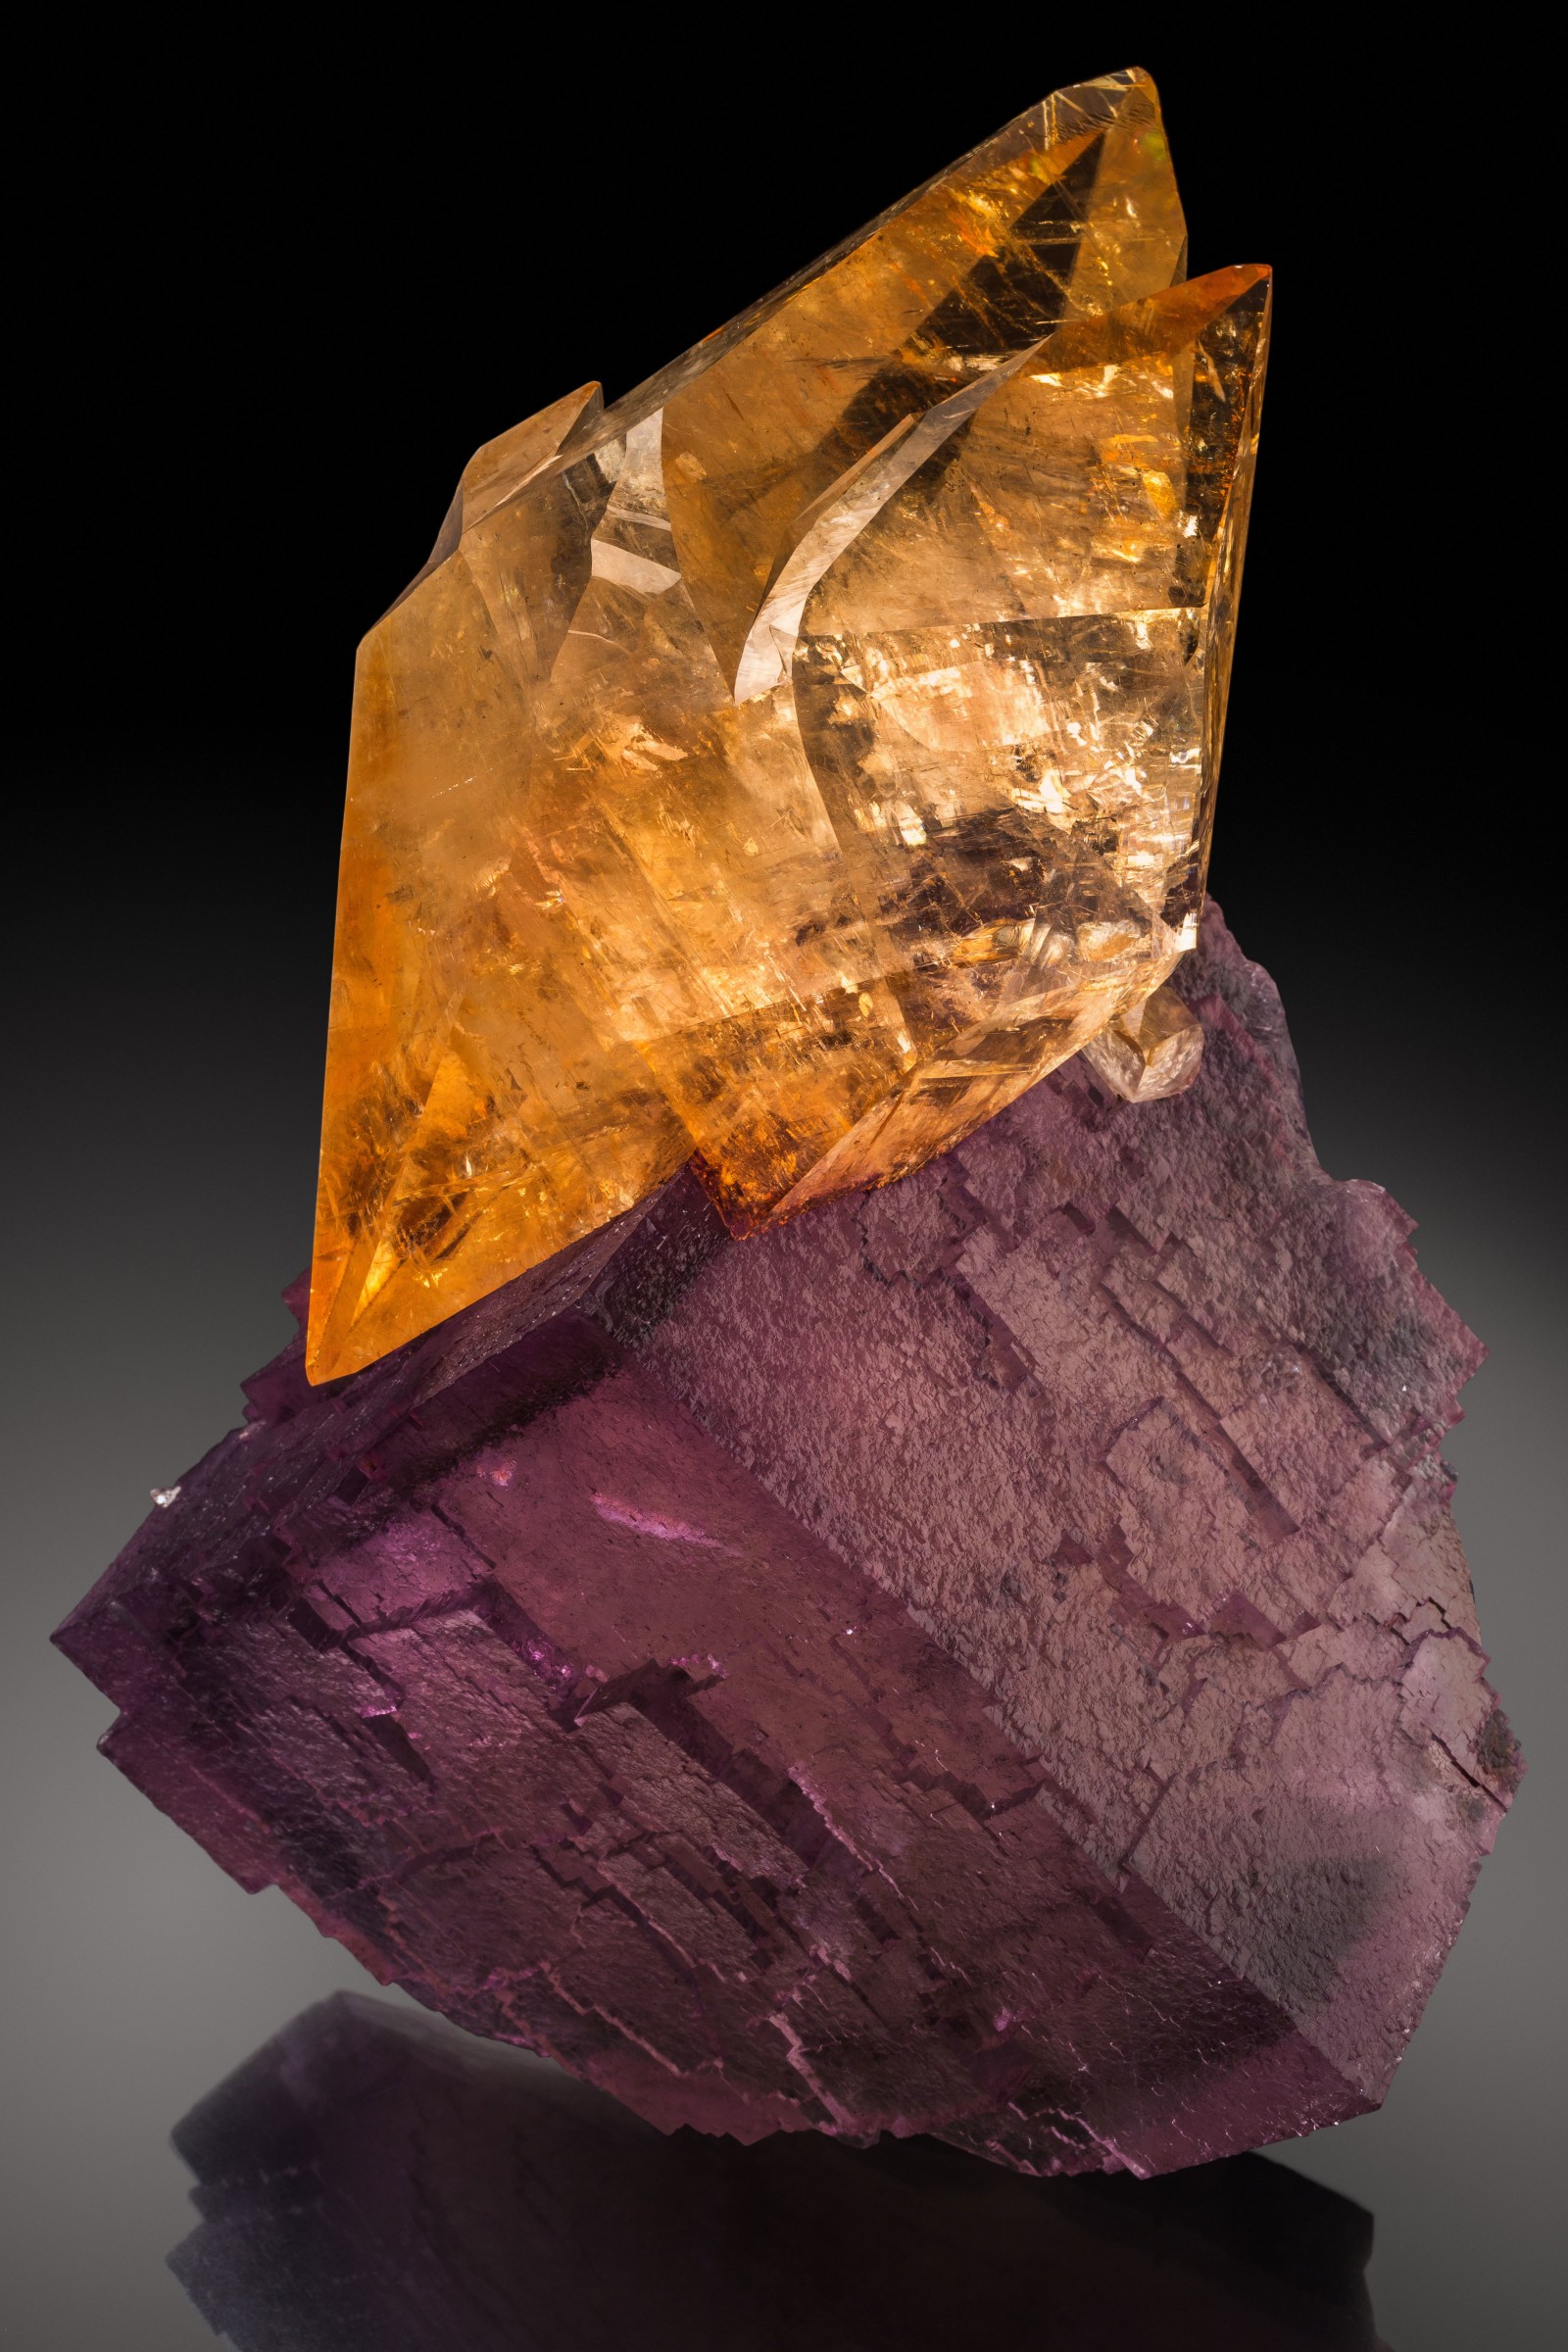 Calcite on Fluorite, Elmwood Mine, Smith County, Tennessee, USA

If color, transparency and sculptural shape are the three principal criteria by which we define the aesthetics of a mineral specimen, then this calcite and fluorite combination from the Elmwood mine must surely be one of the most aesthetic minerals ever to have been recovered from the earth! The piece also manages to combine a beautiful combination of surface textures, with the glassy luster of the calcite contrasting with the sculptural texture of the fluorite